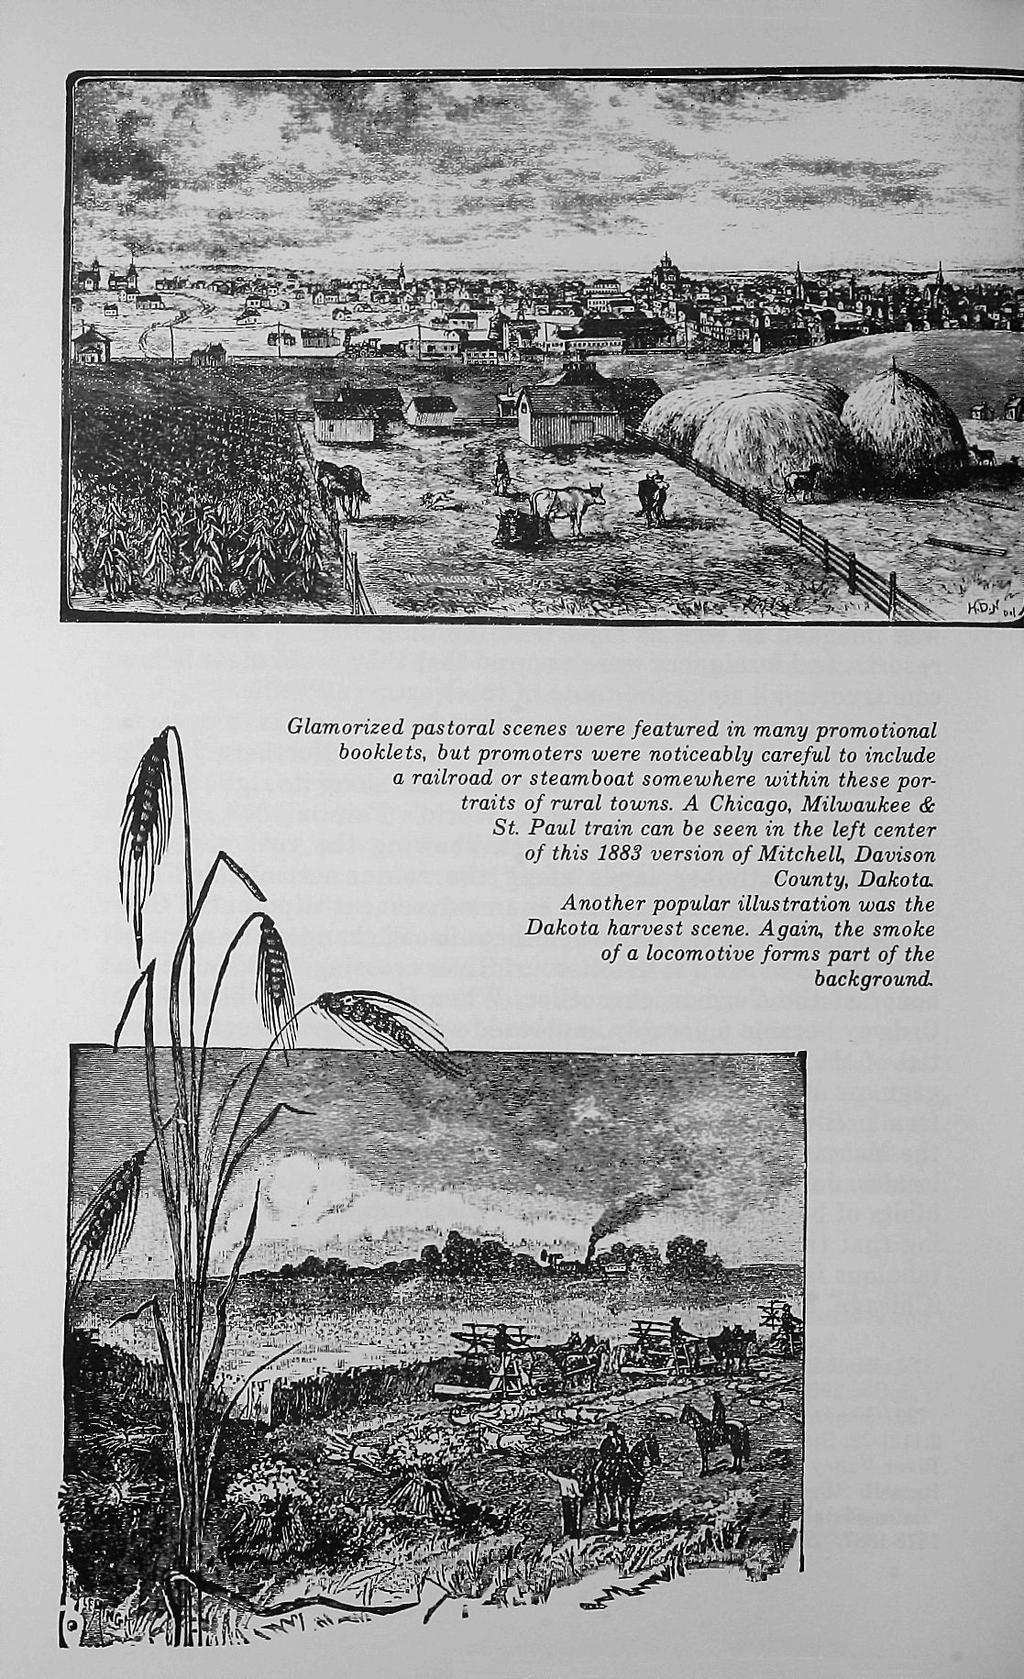 Glamorized pastoral scenes were featured in many promotional booklets, but promoters were noticeably careful to include a railroad or steamboat somewhere within these portraits of rural towns.